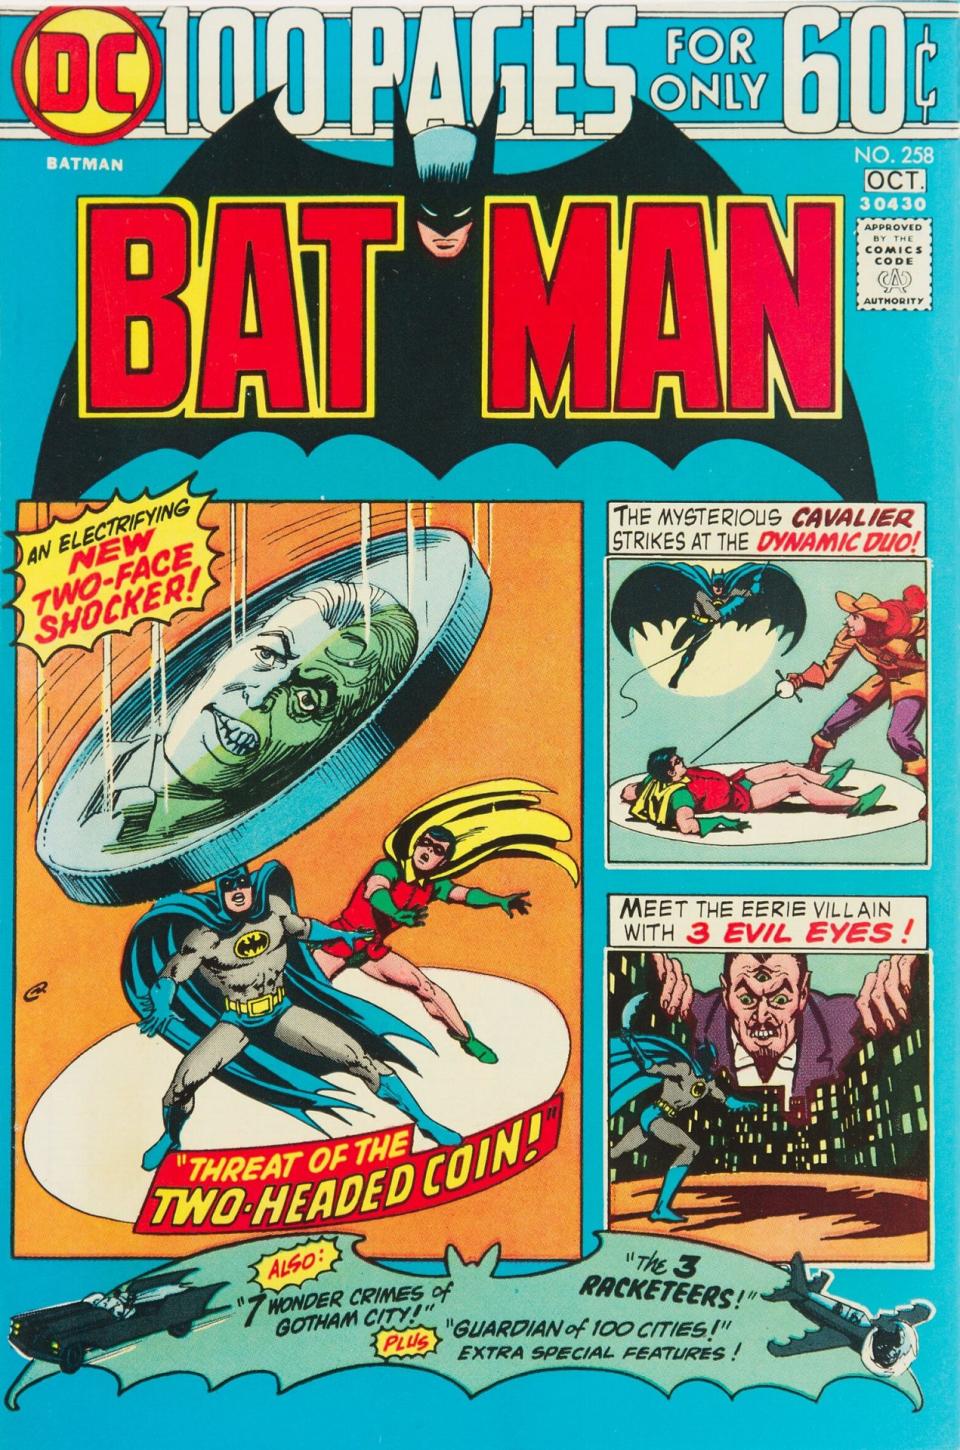 The cover for Batman #258 shows Batman and Robin being crushed by a giant Two Face coin